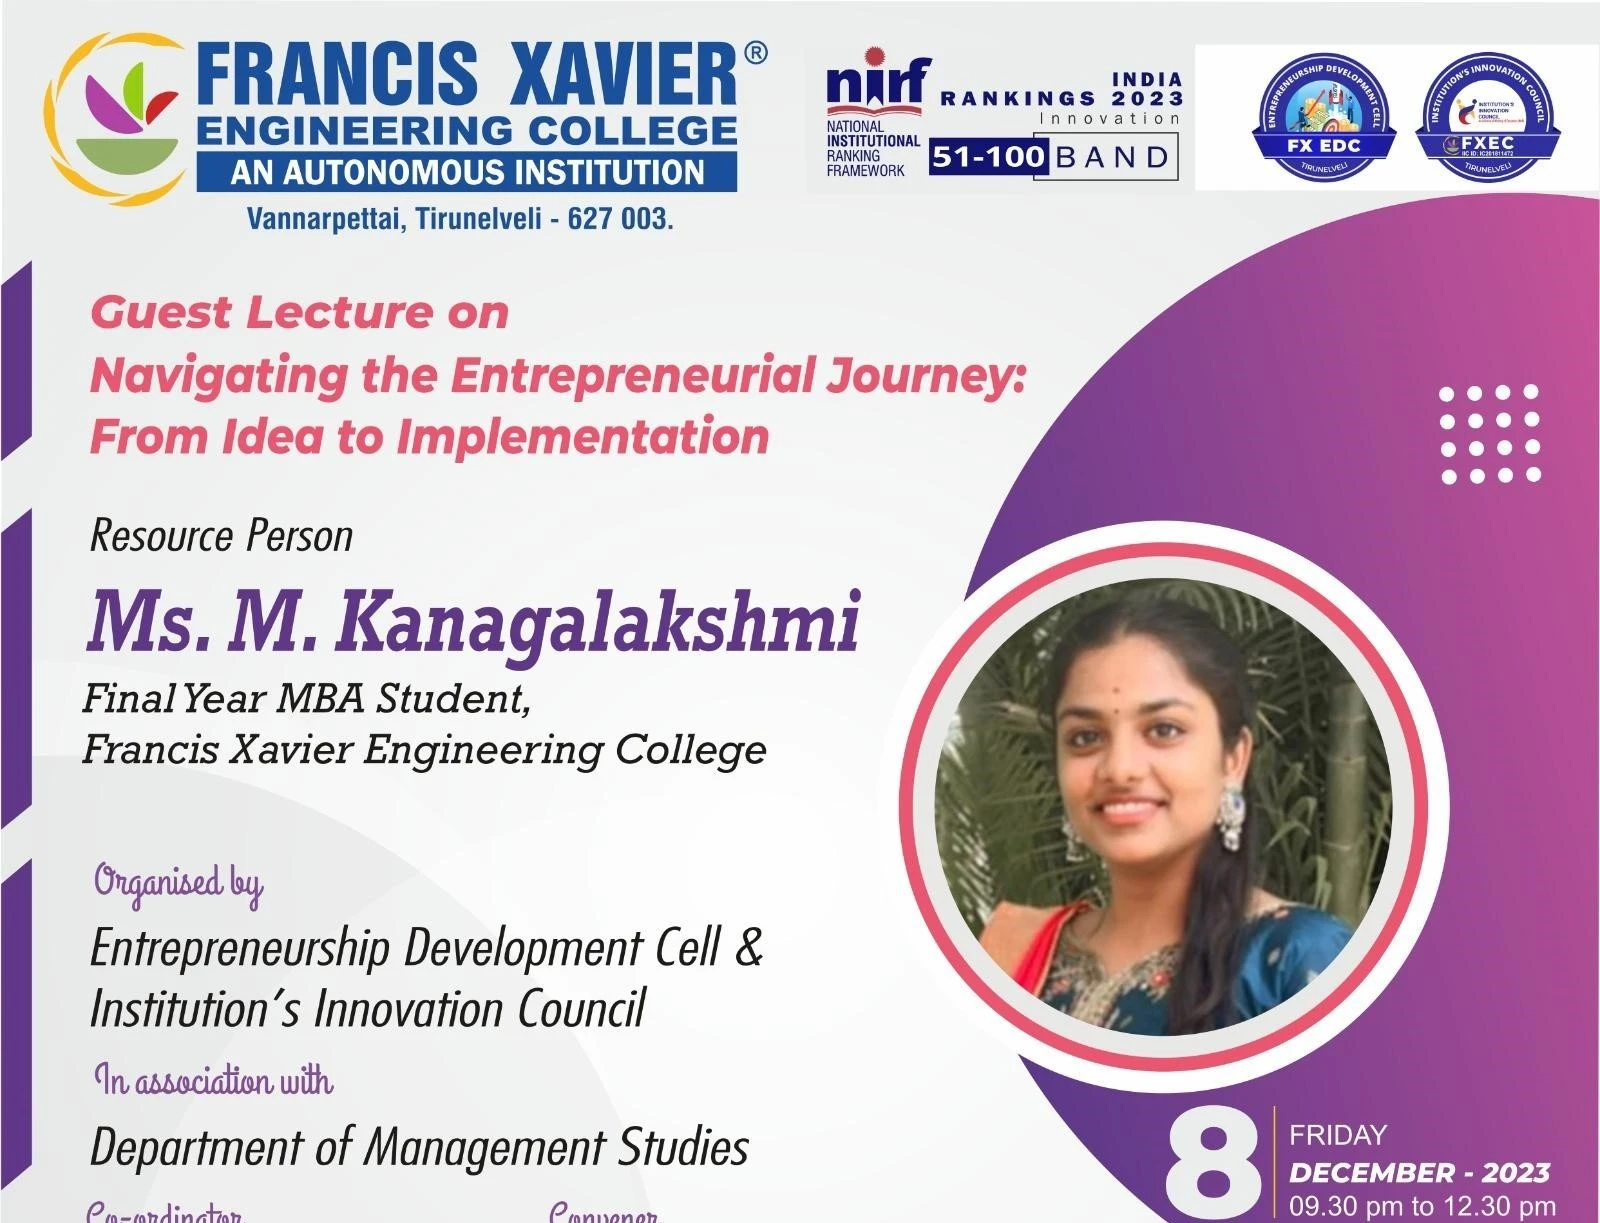 GUEST LECTURE ON NAVIGATING THE ENTREPRENEURIAL JOURNEY: FROM IDEA TO IMPLEMENTATION